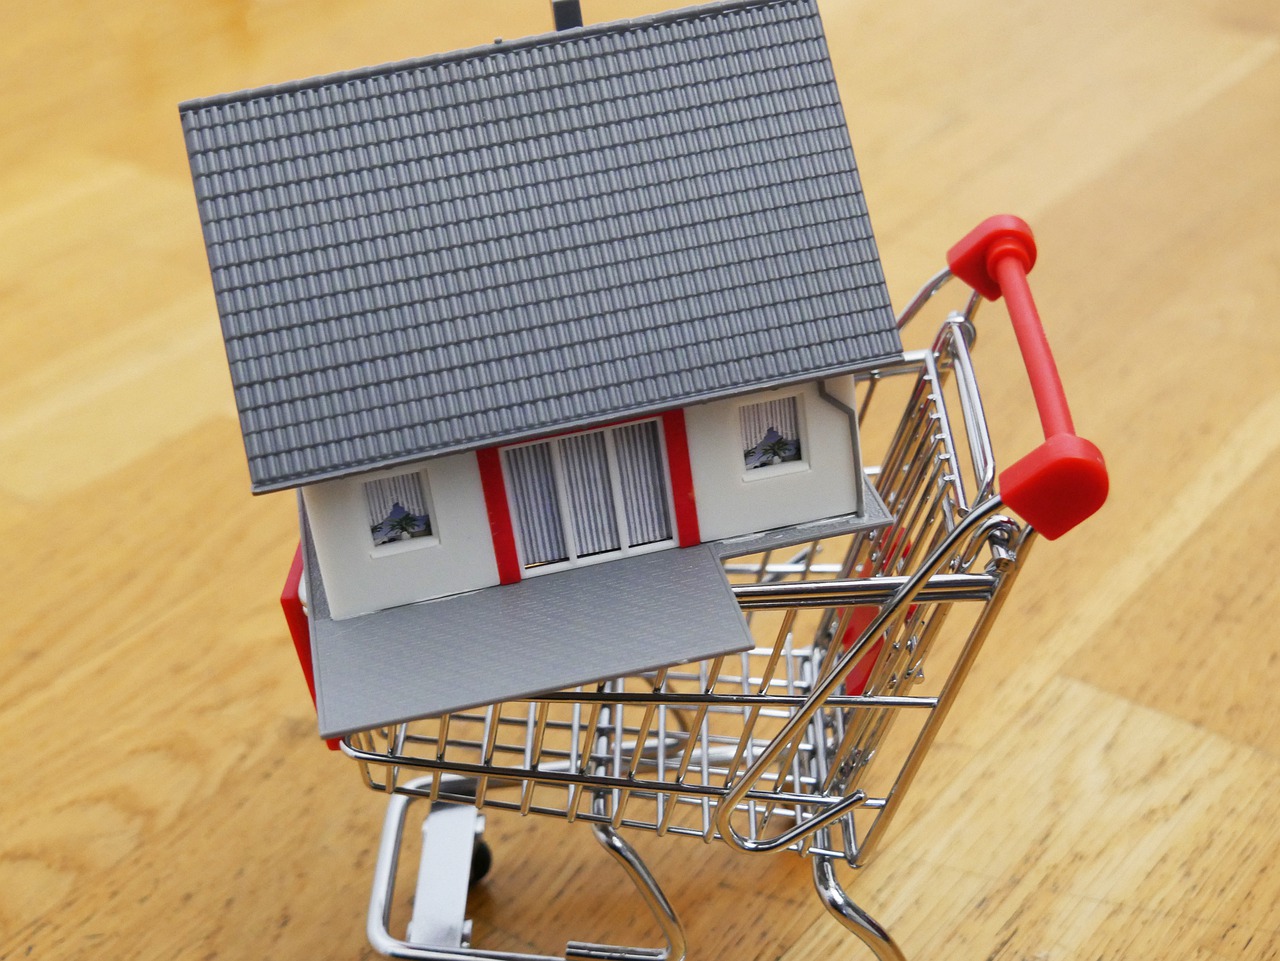 Miniature house in shopping cart showing June 2022 buyer's market.